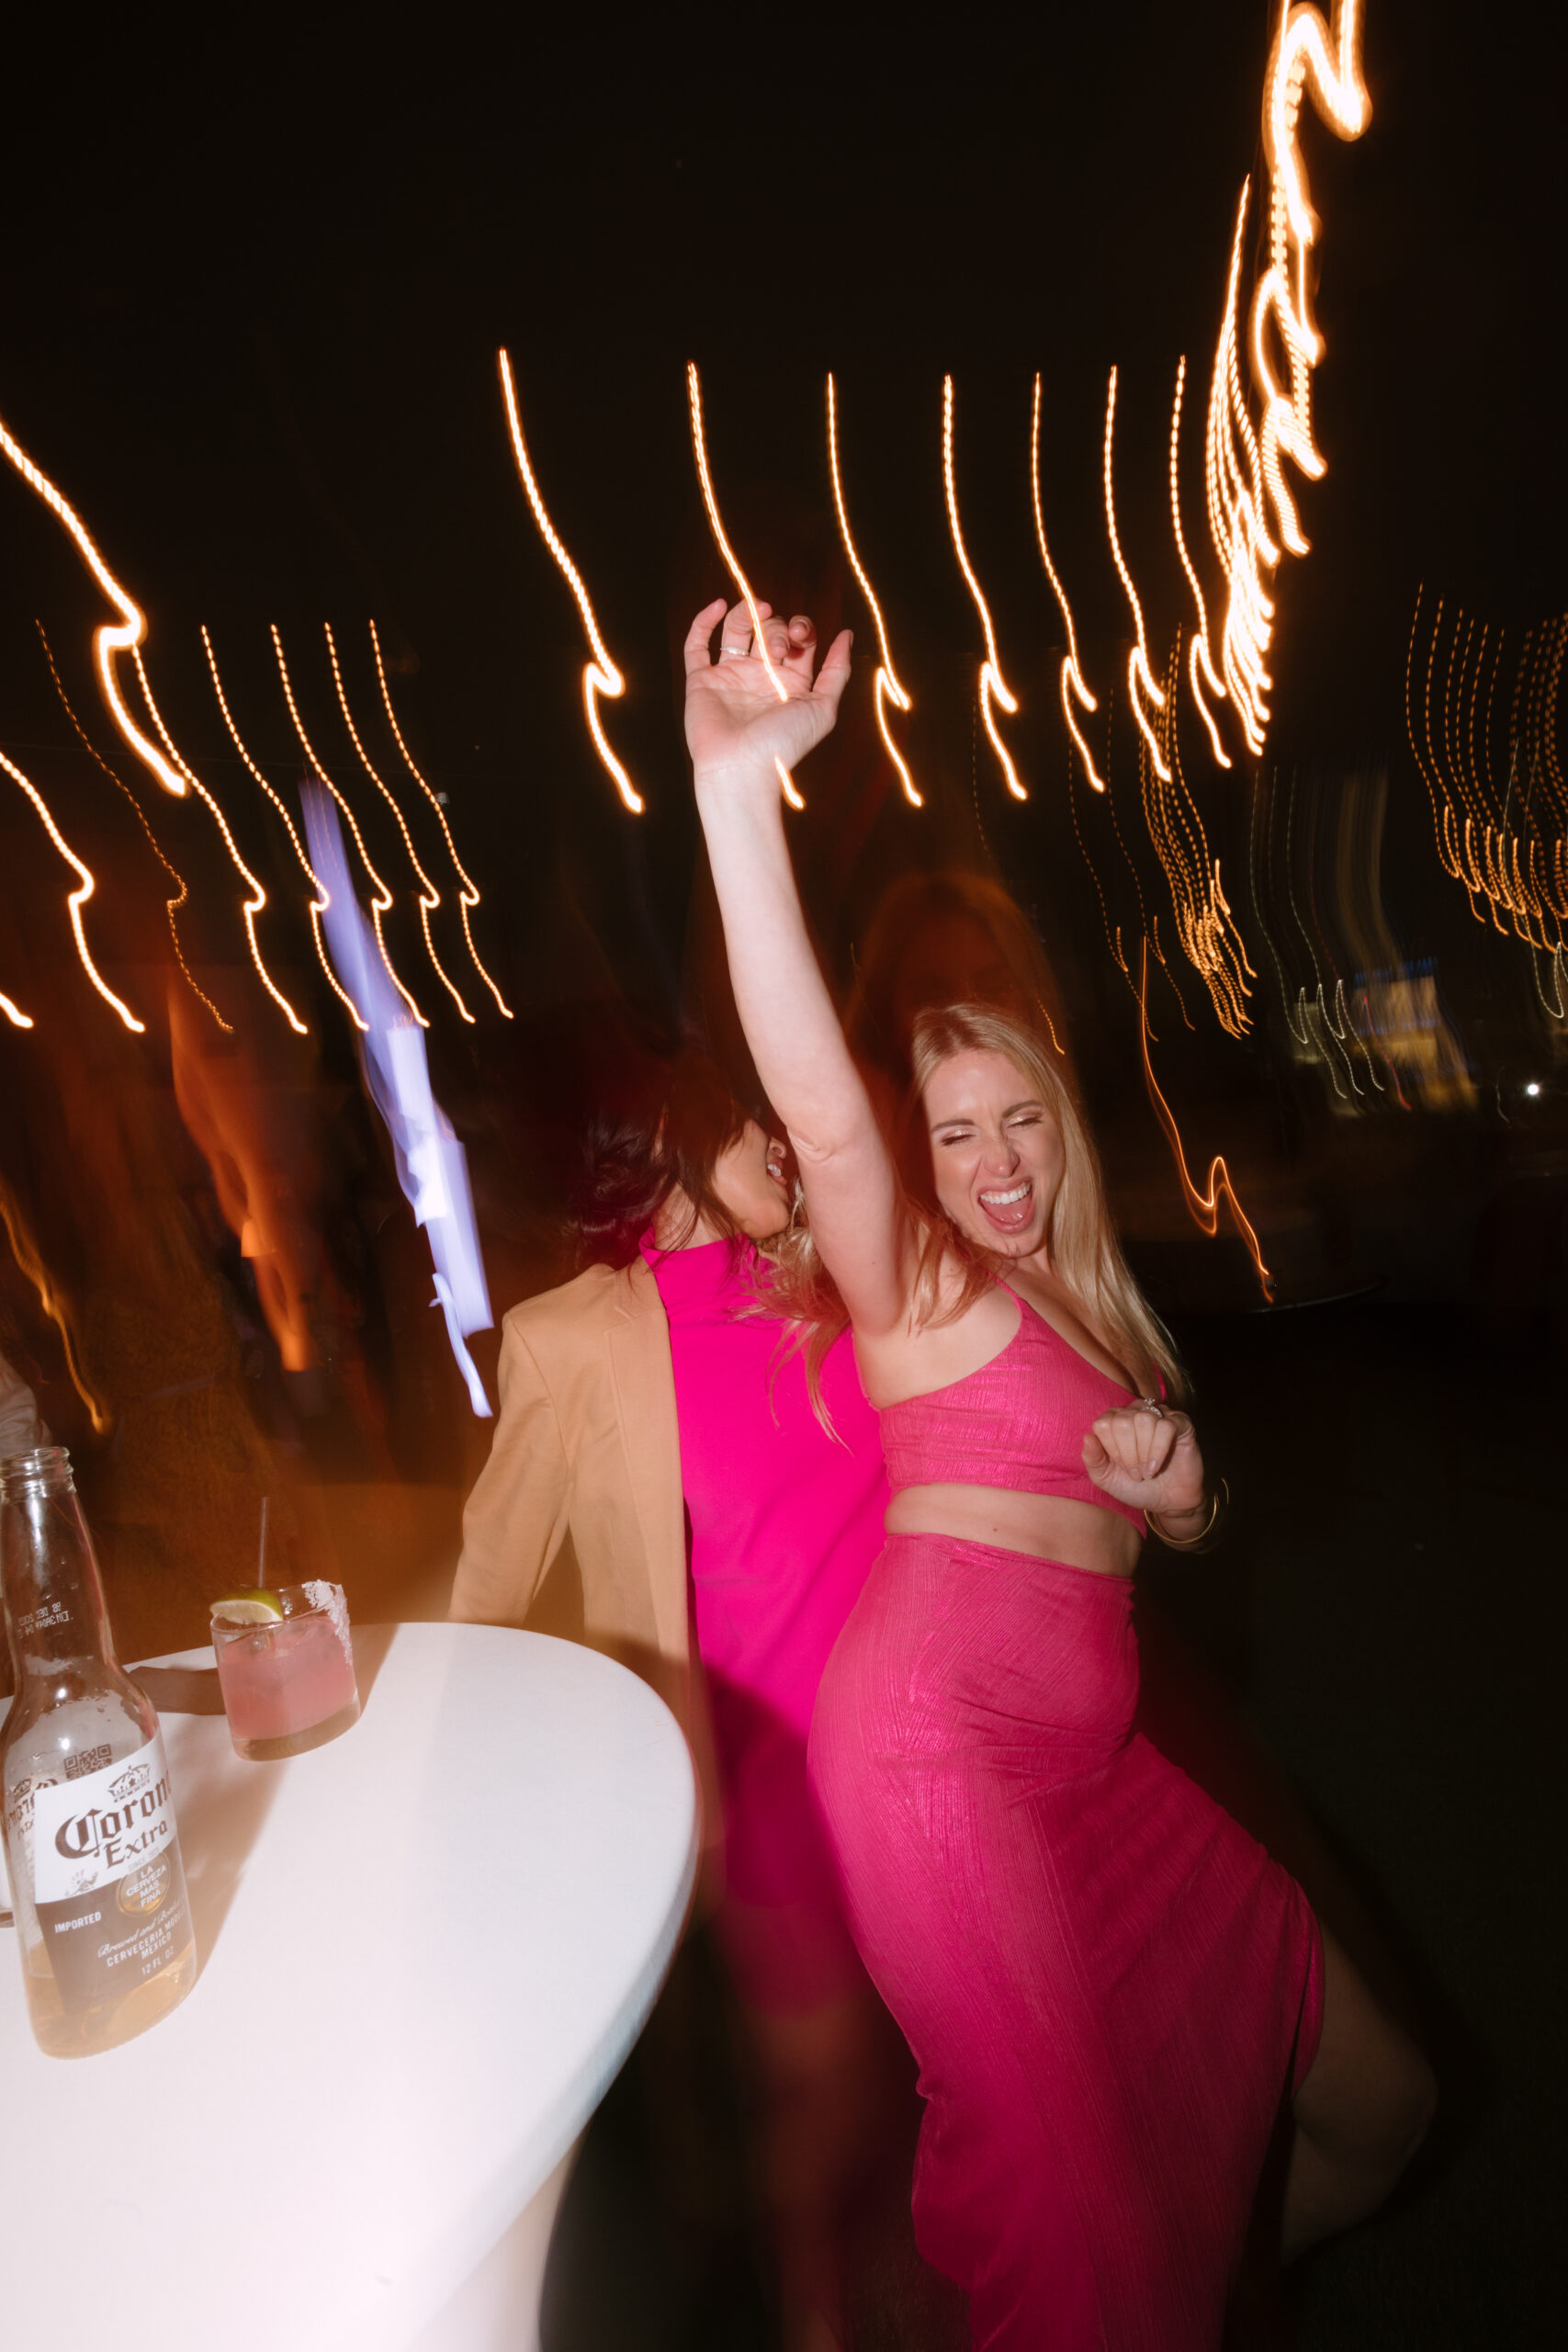 shutter drag flash photo of wedding guests in hot pink dancing with their hands in the air